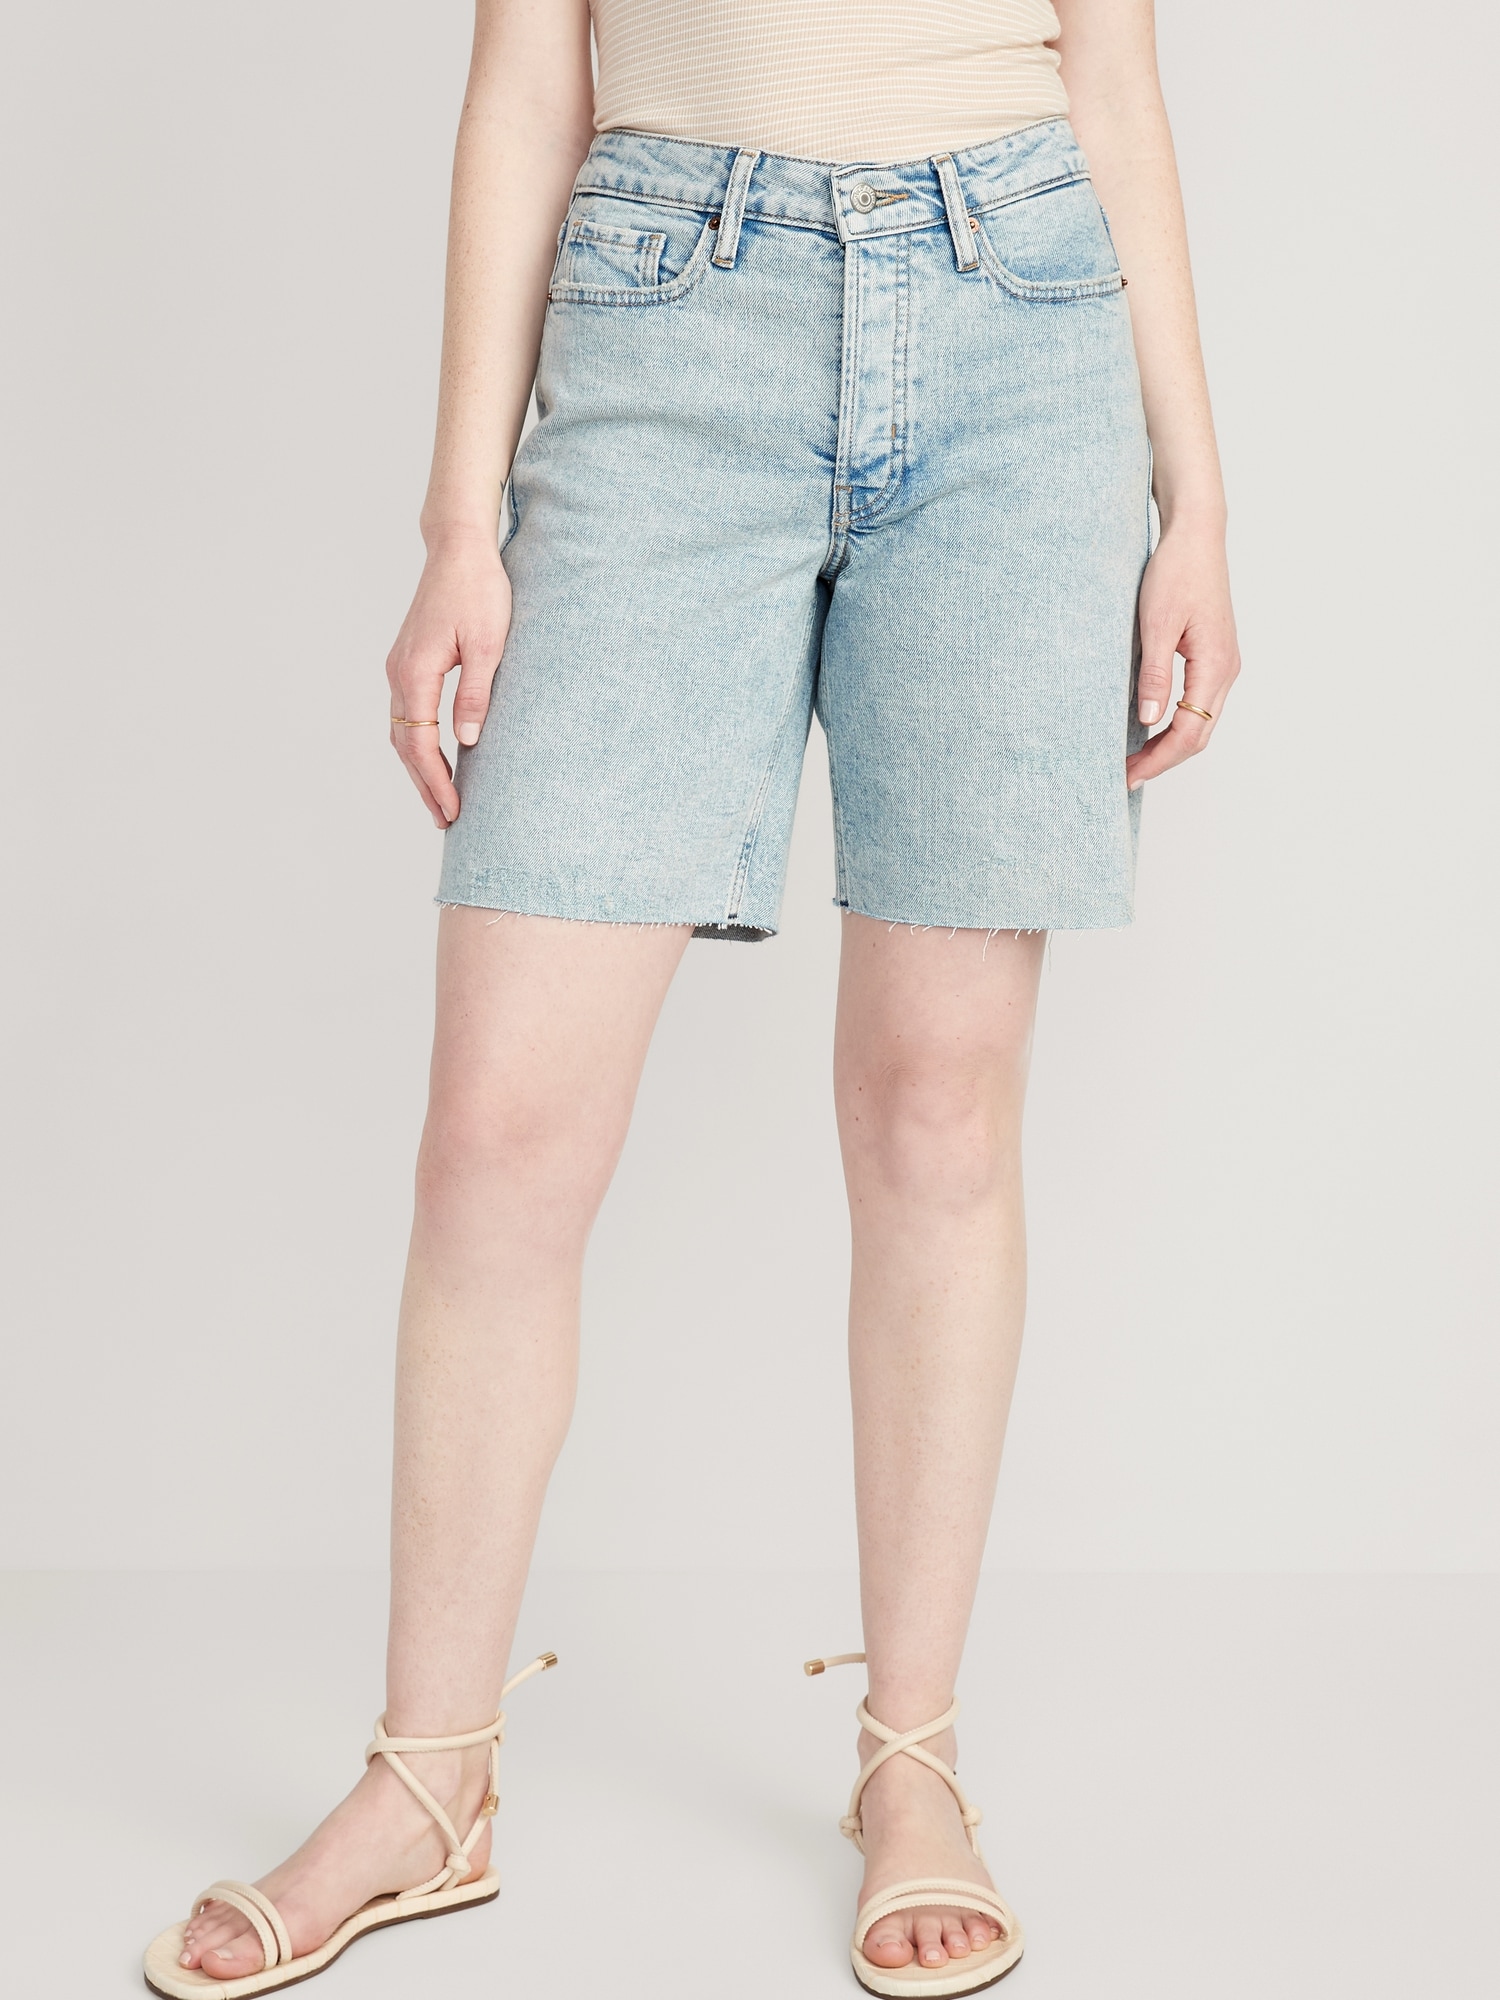 Old Navy High-Waisted OG Loose Button-Fly Jean Shorts for Women -- 9-inch inseam blue. 1